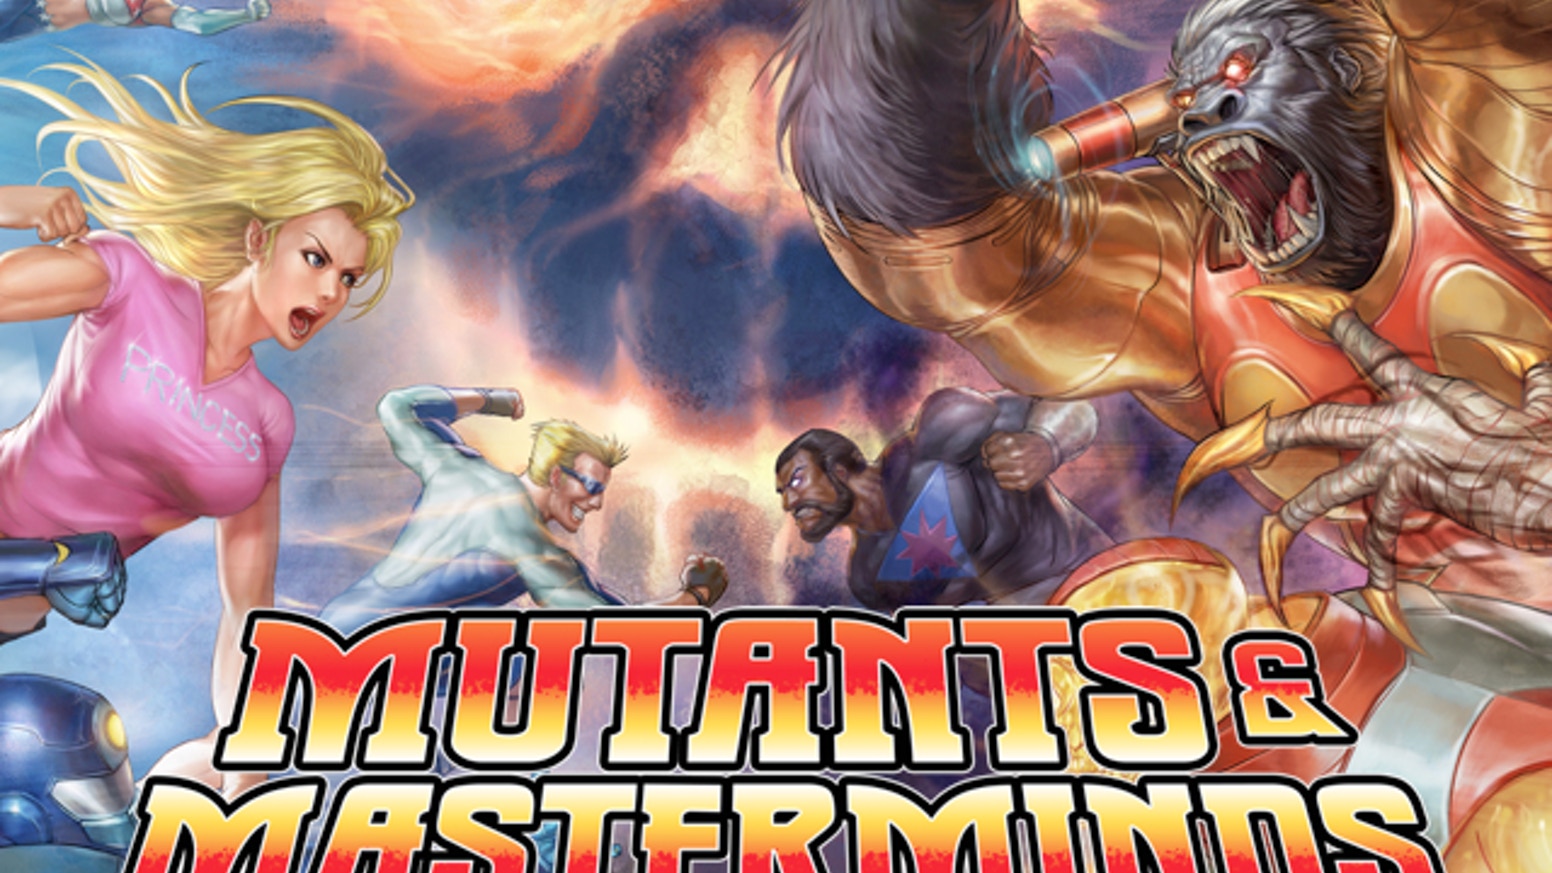 A femme looking person and a masc looking person preparing to punch a giant gorilla and a muscular masc looking person. Text reads 'Mutants and Masterminds'.